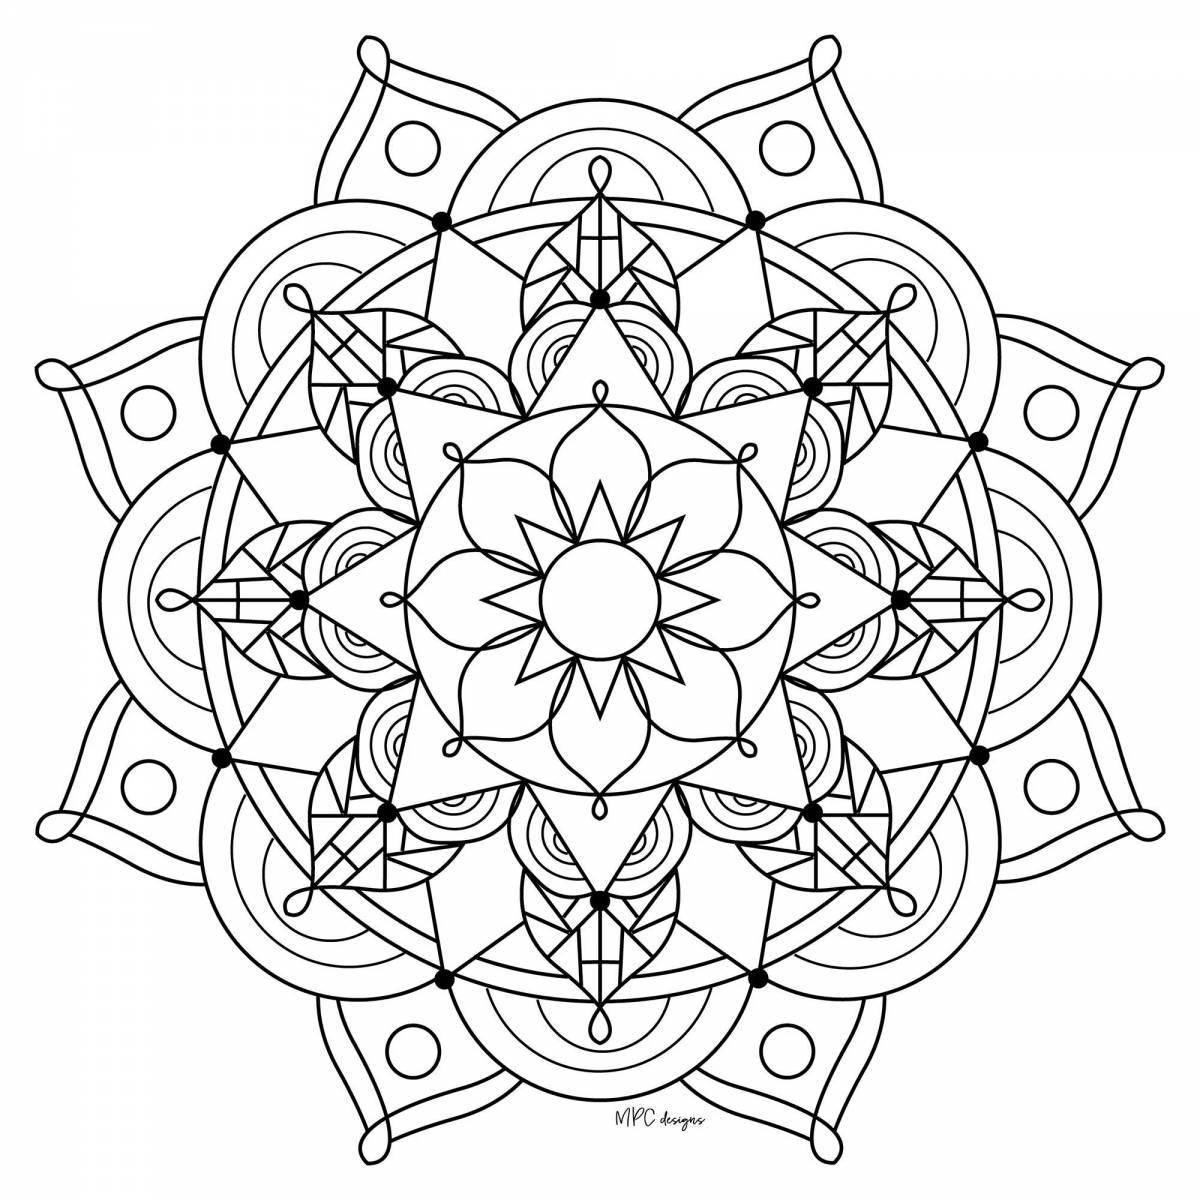 Relaxing mantra coloring pages